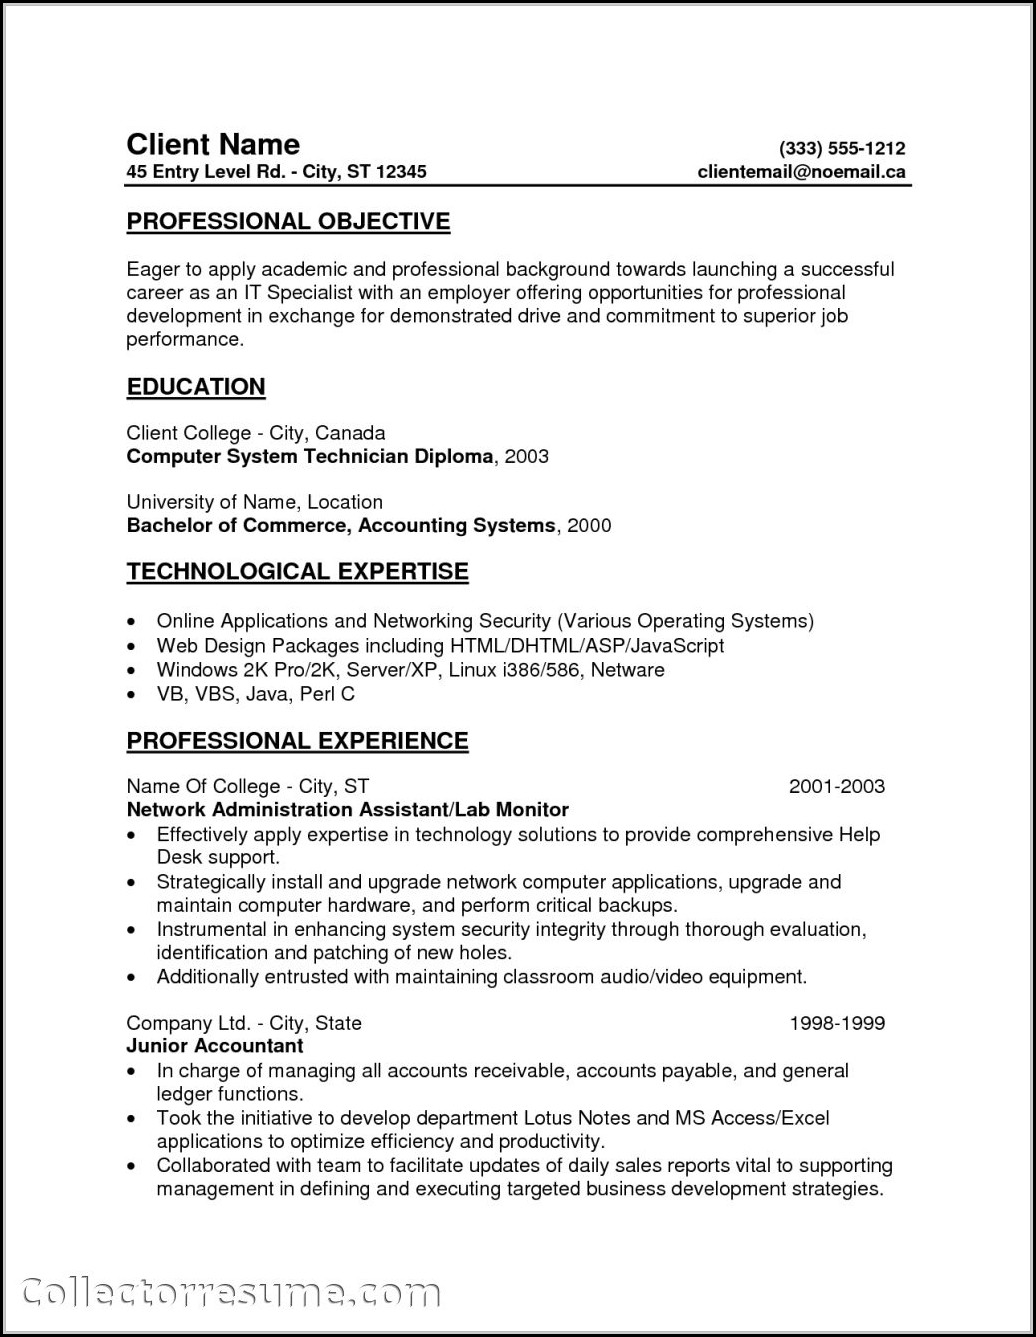 Free Resume Templates For Entry Level Jobs